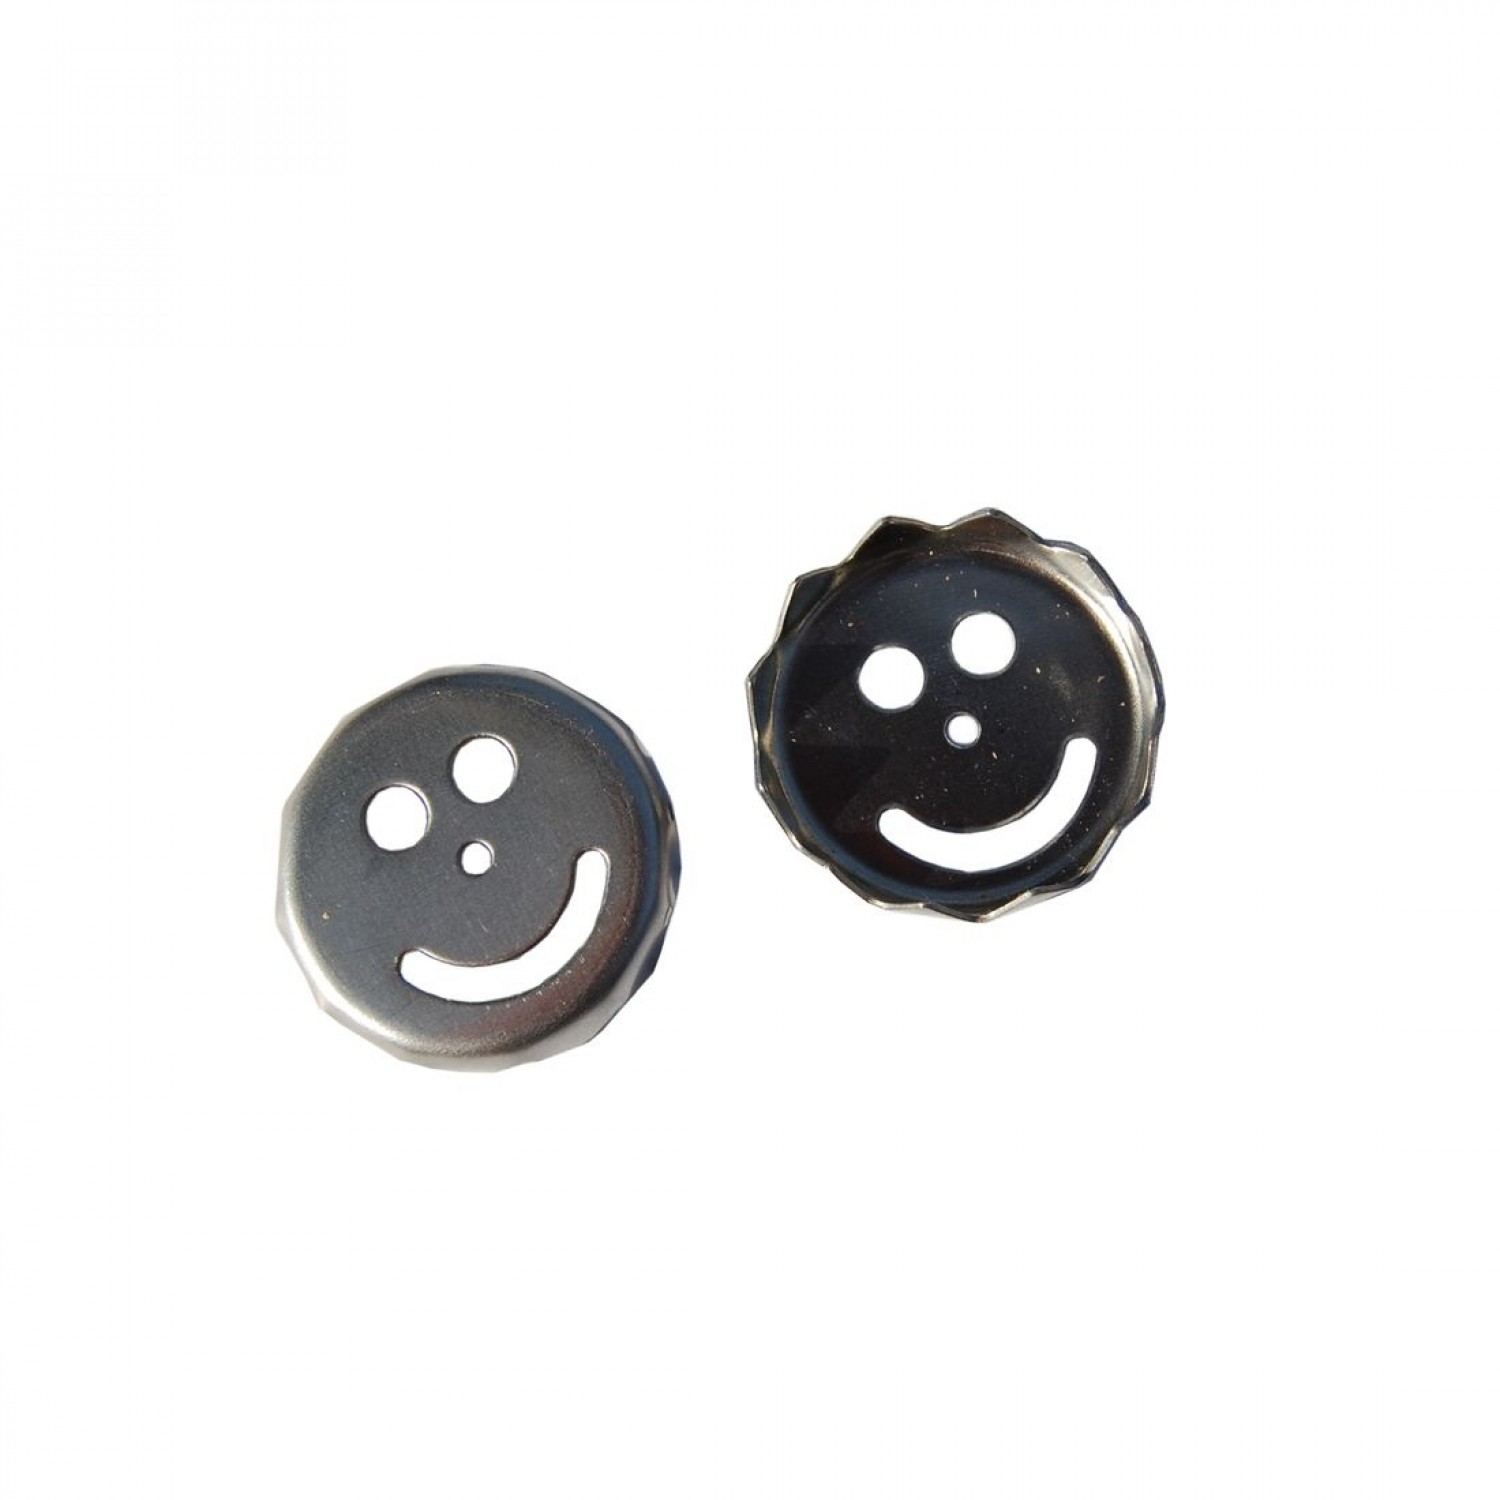 2 x spare metal plates SMILE for magnetic soap holder | D.O.M.